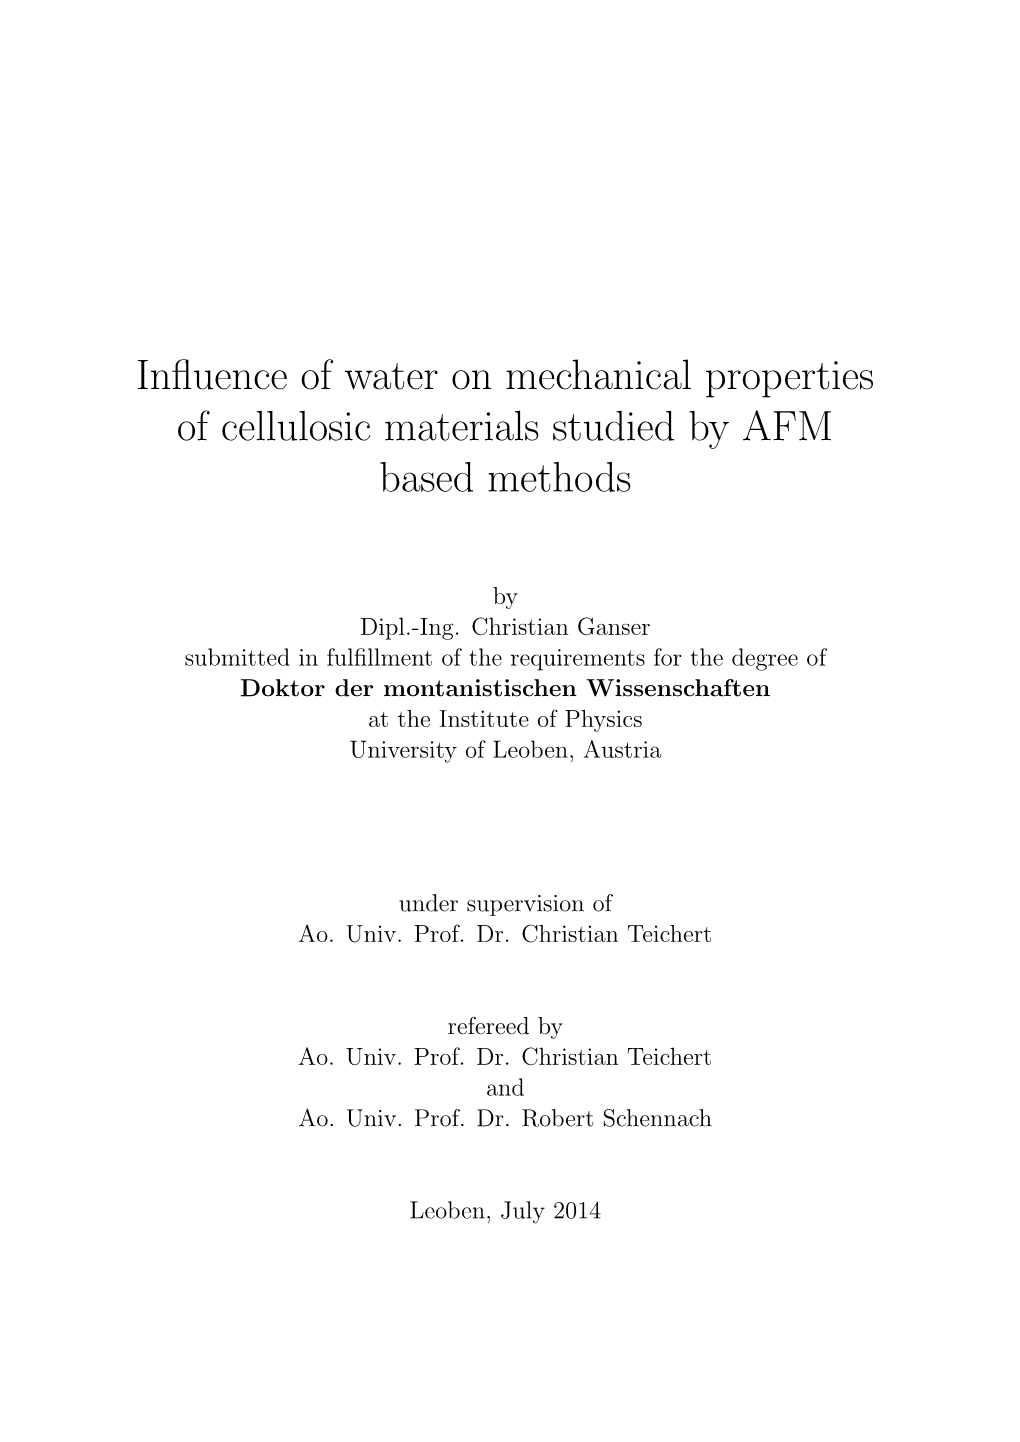 Influence of Water on Mechanical Properties of Cellulosic Materials Studied by AFM Based Methods